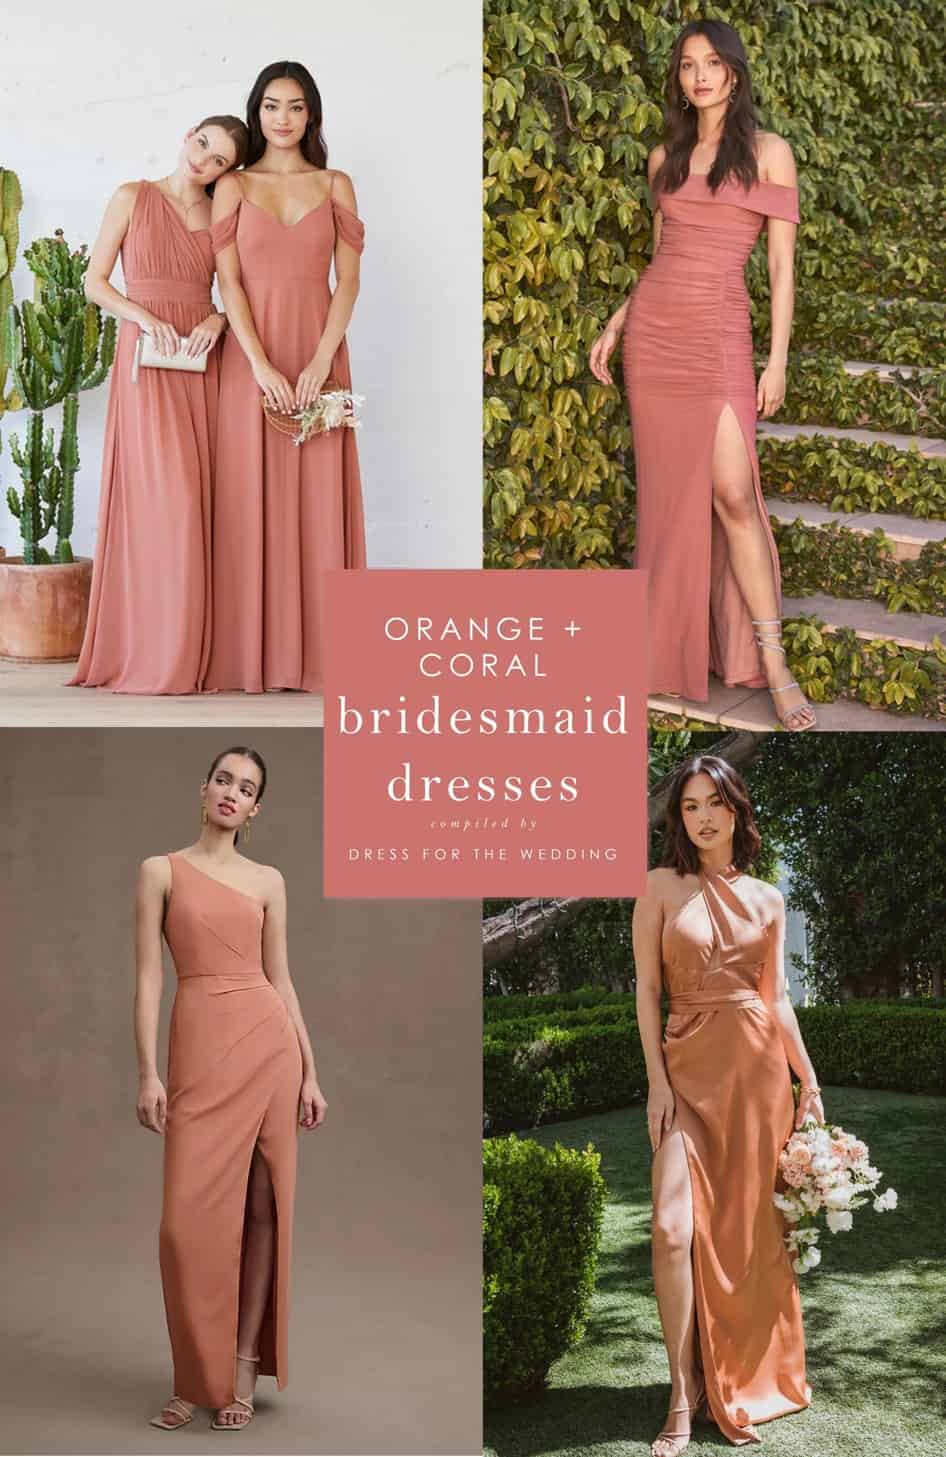 BridesMade - Looking stunning in our coral infinity dress!